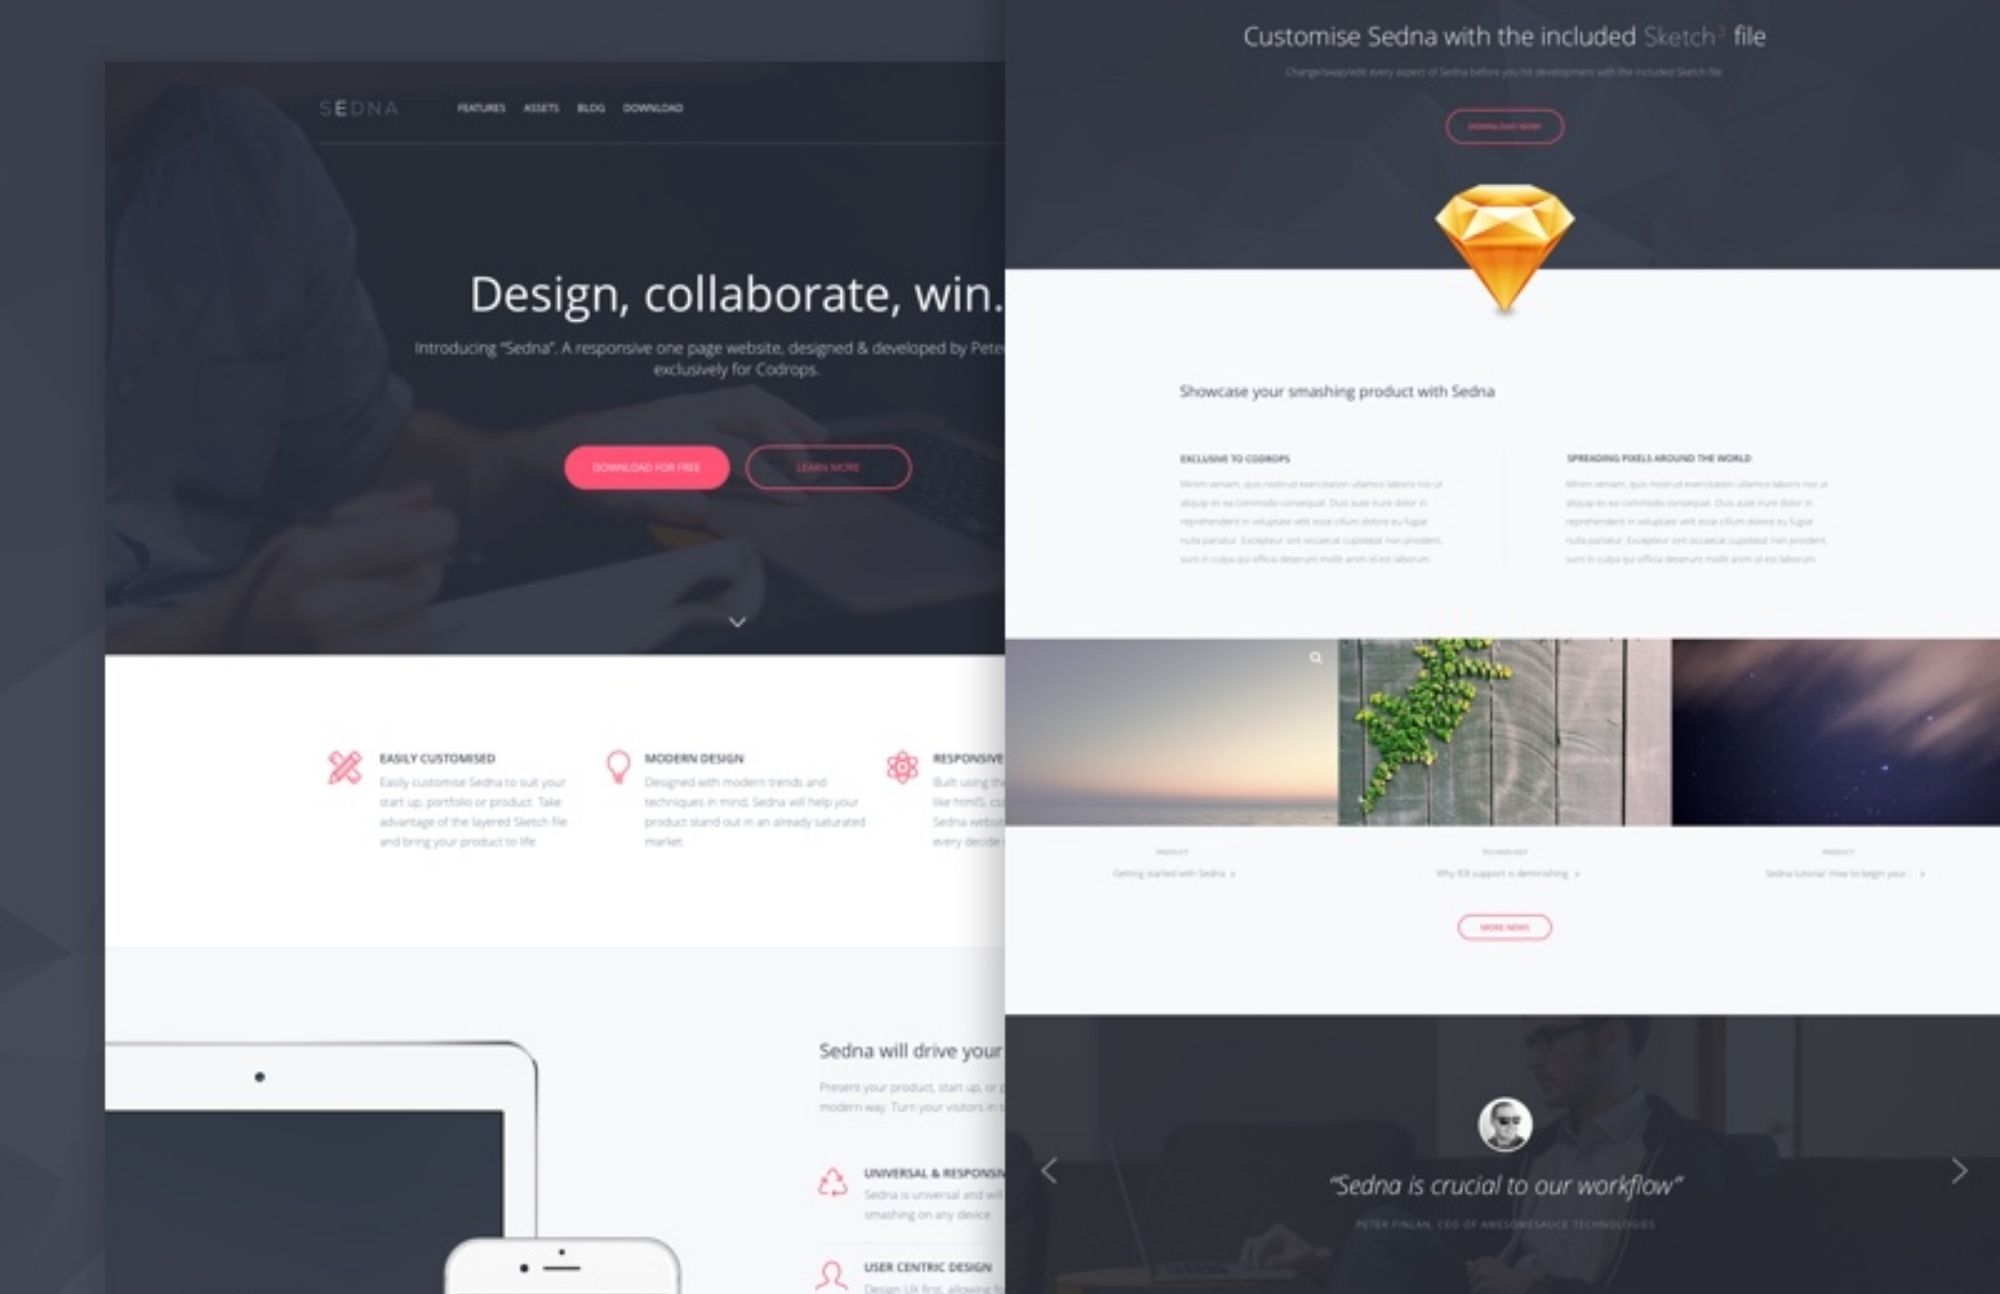 A homepage with Sedna design elements and a yellow diamond icon